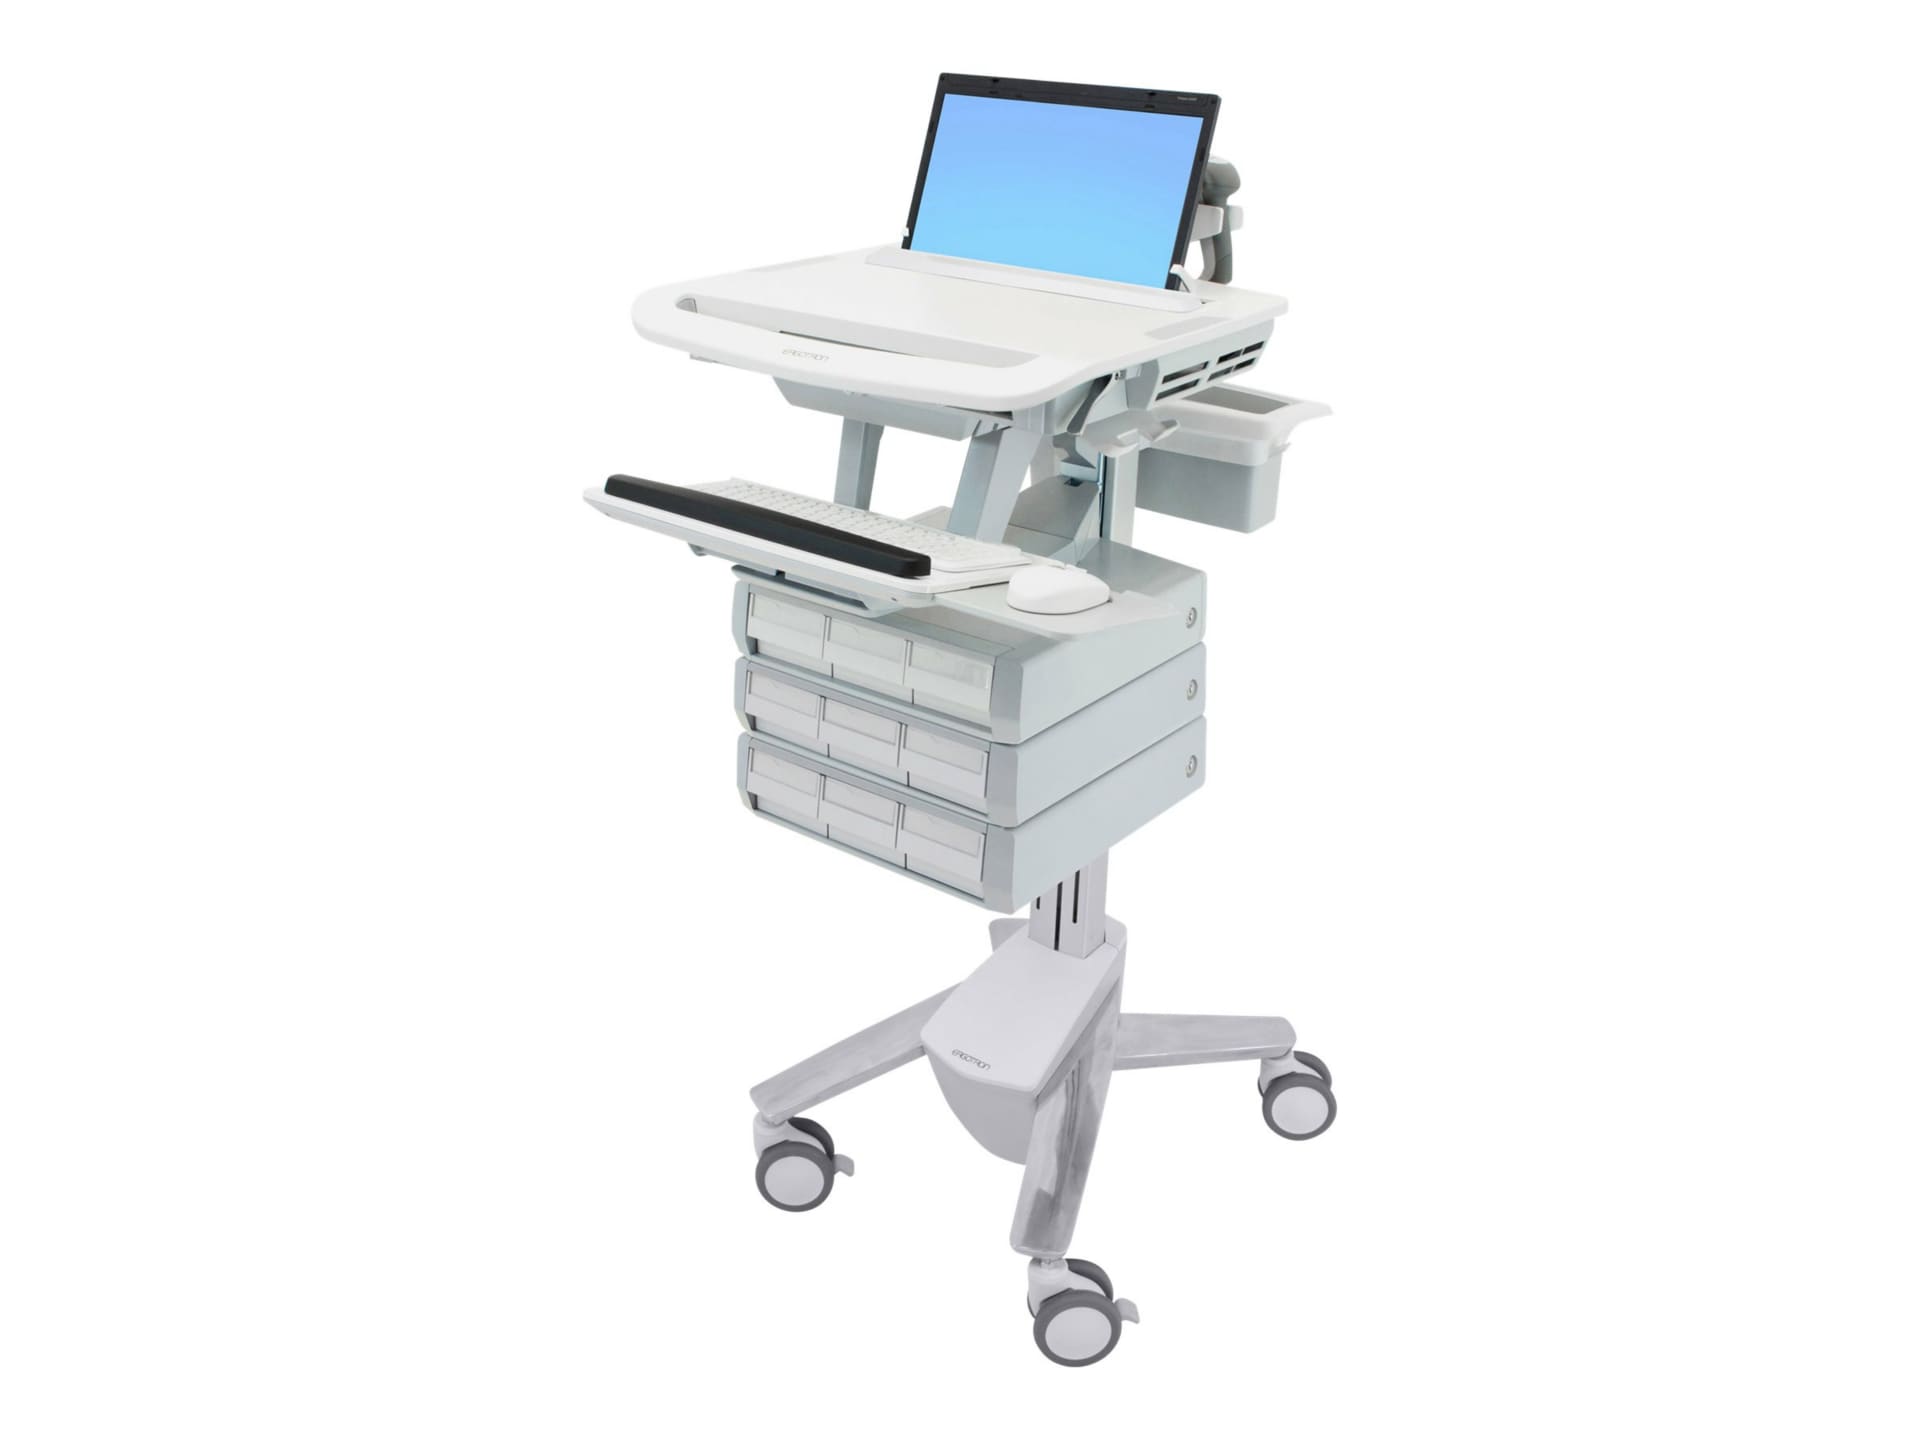 Ergotron StyleView cart - open architecture - for notebook / keyboard / mouse / scanner - gray, white, polished aluminum